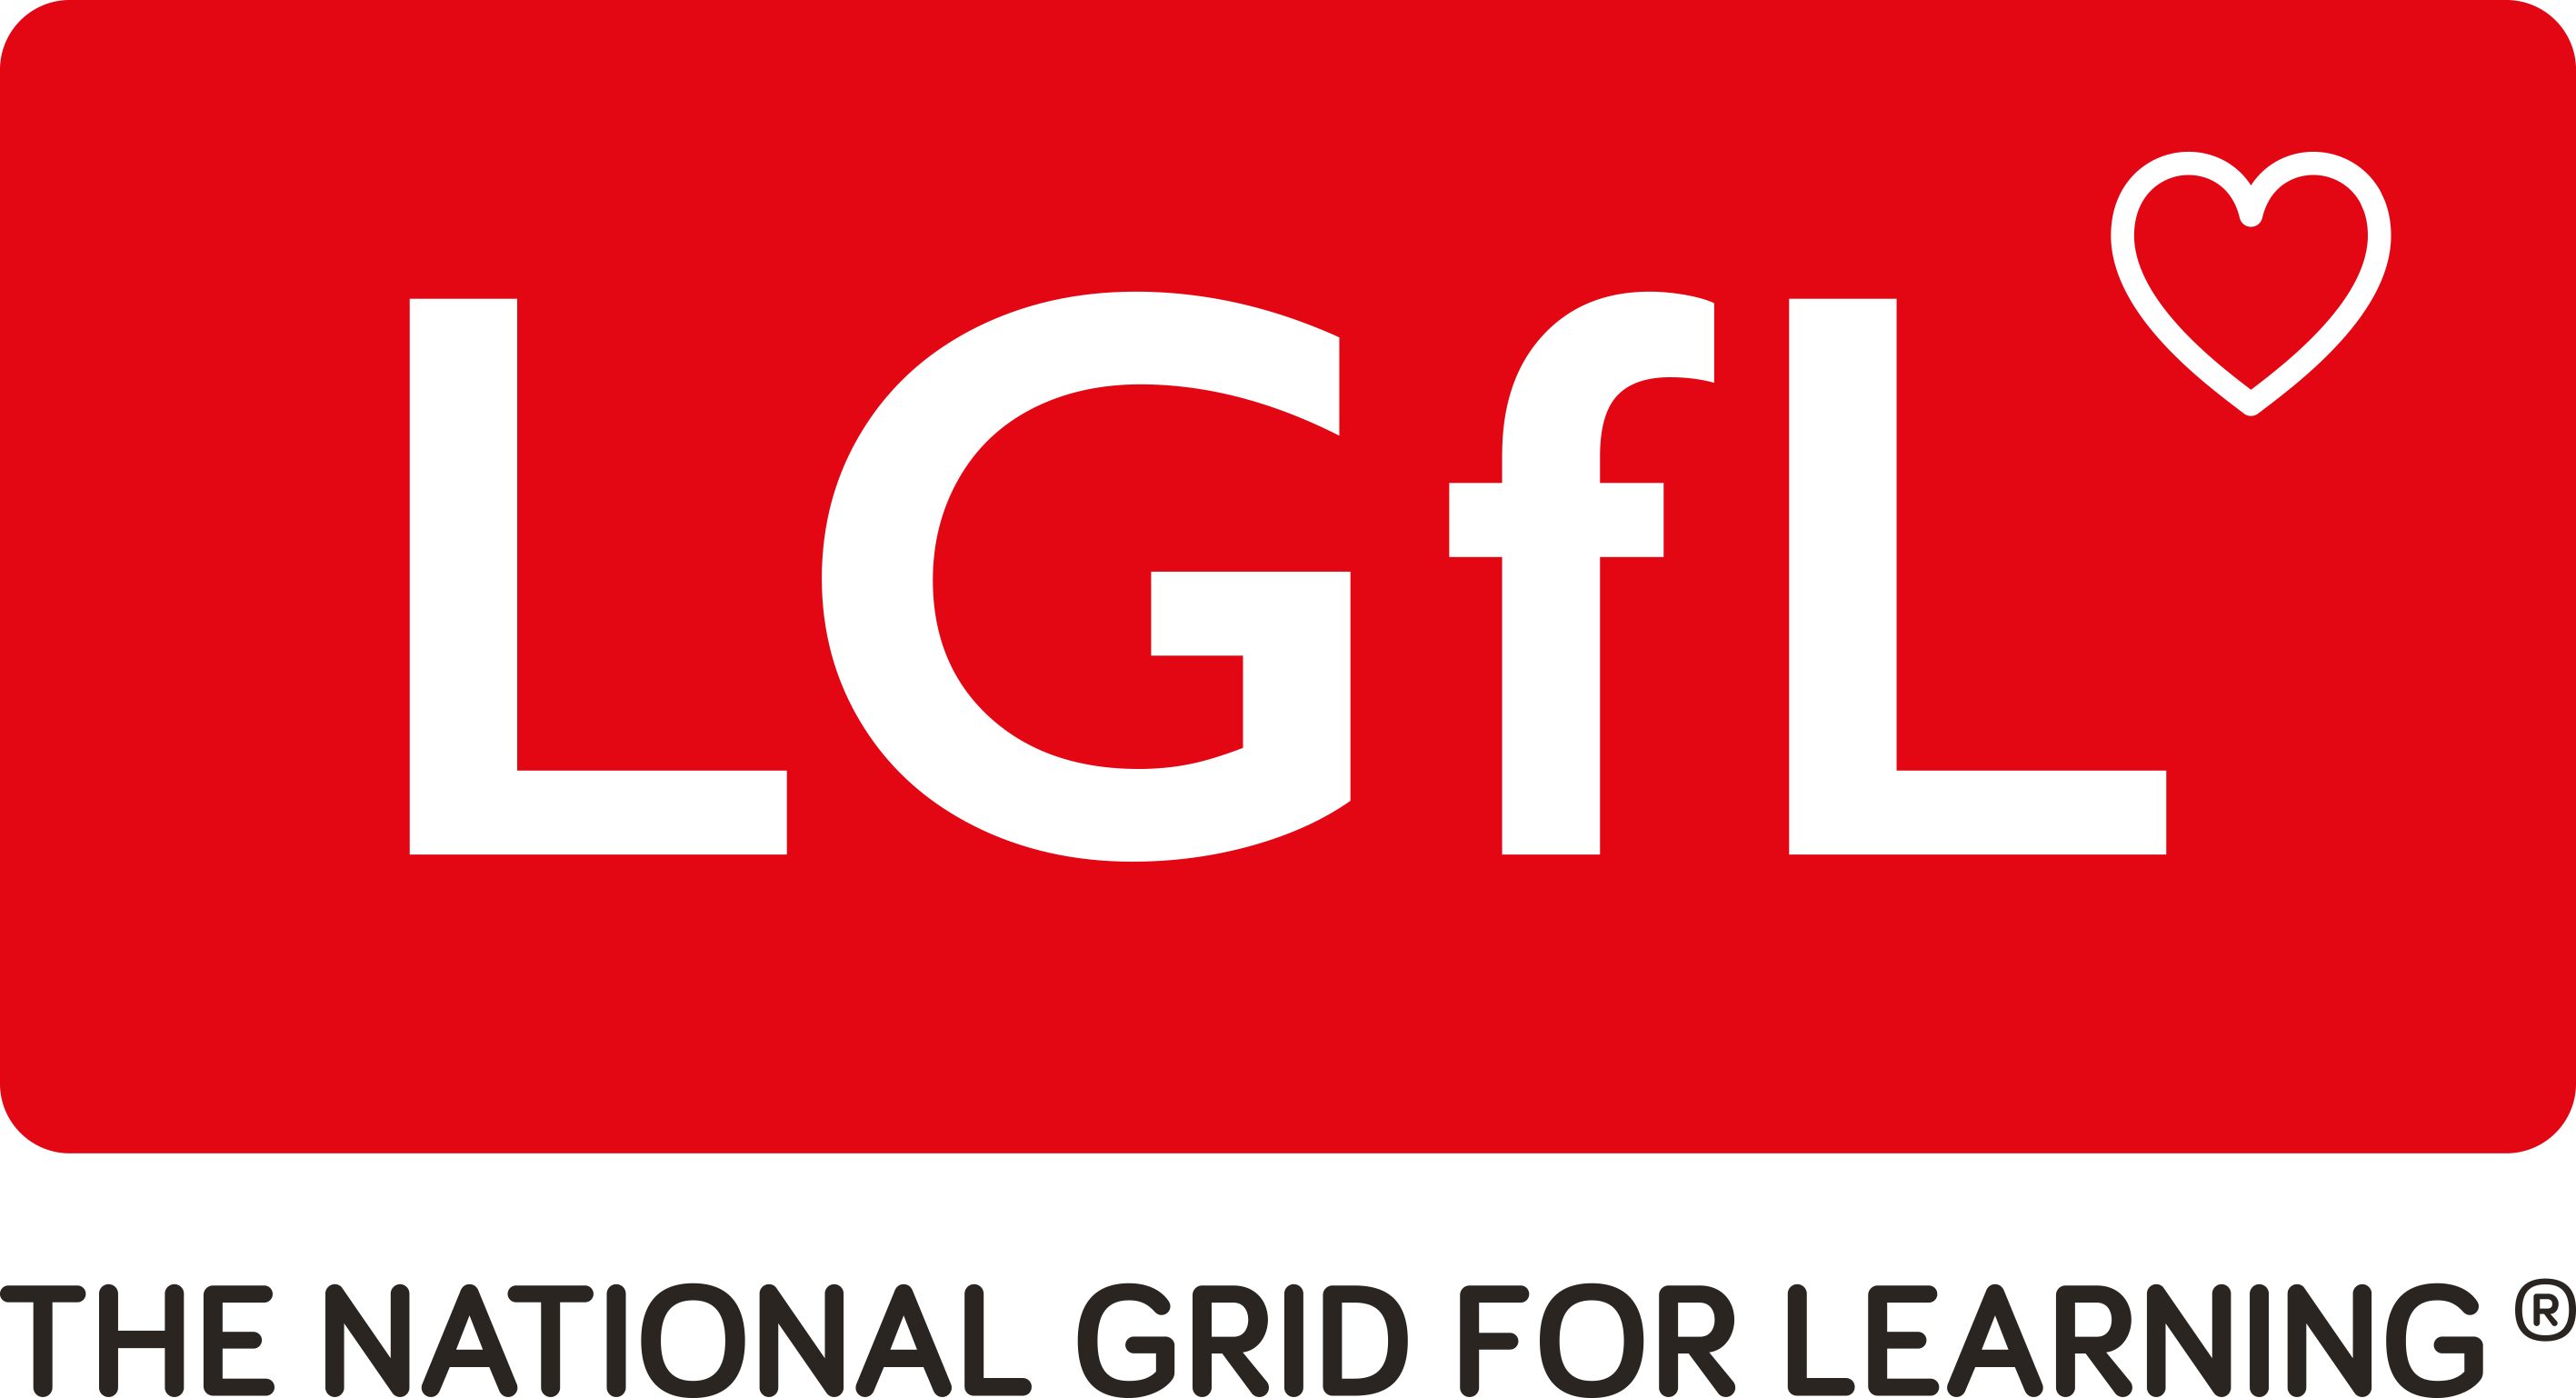 LGfL - The National Grid for Learning